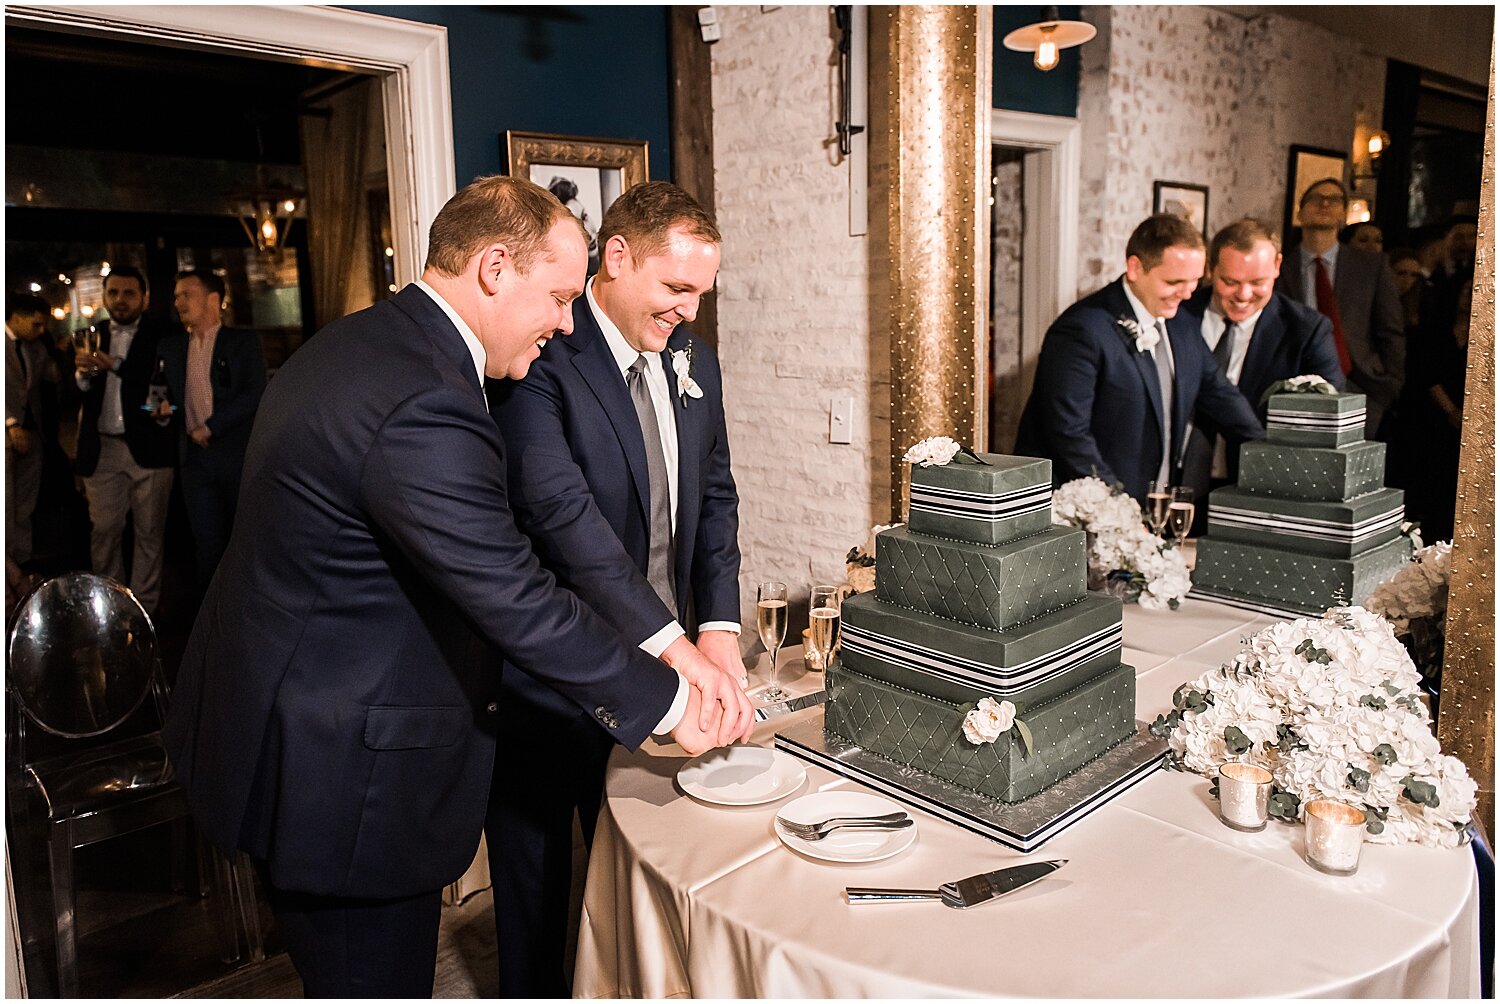  the grooms cutting their wedding cake 